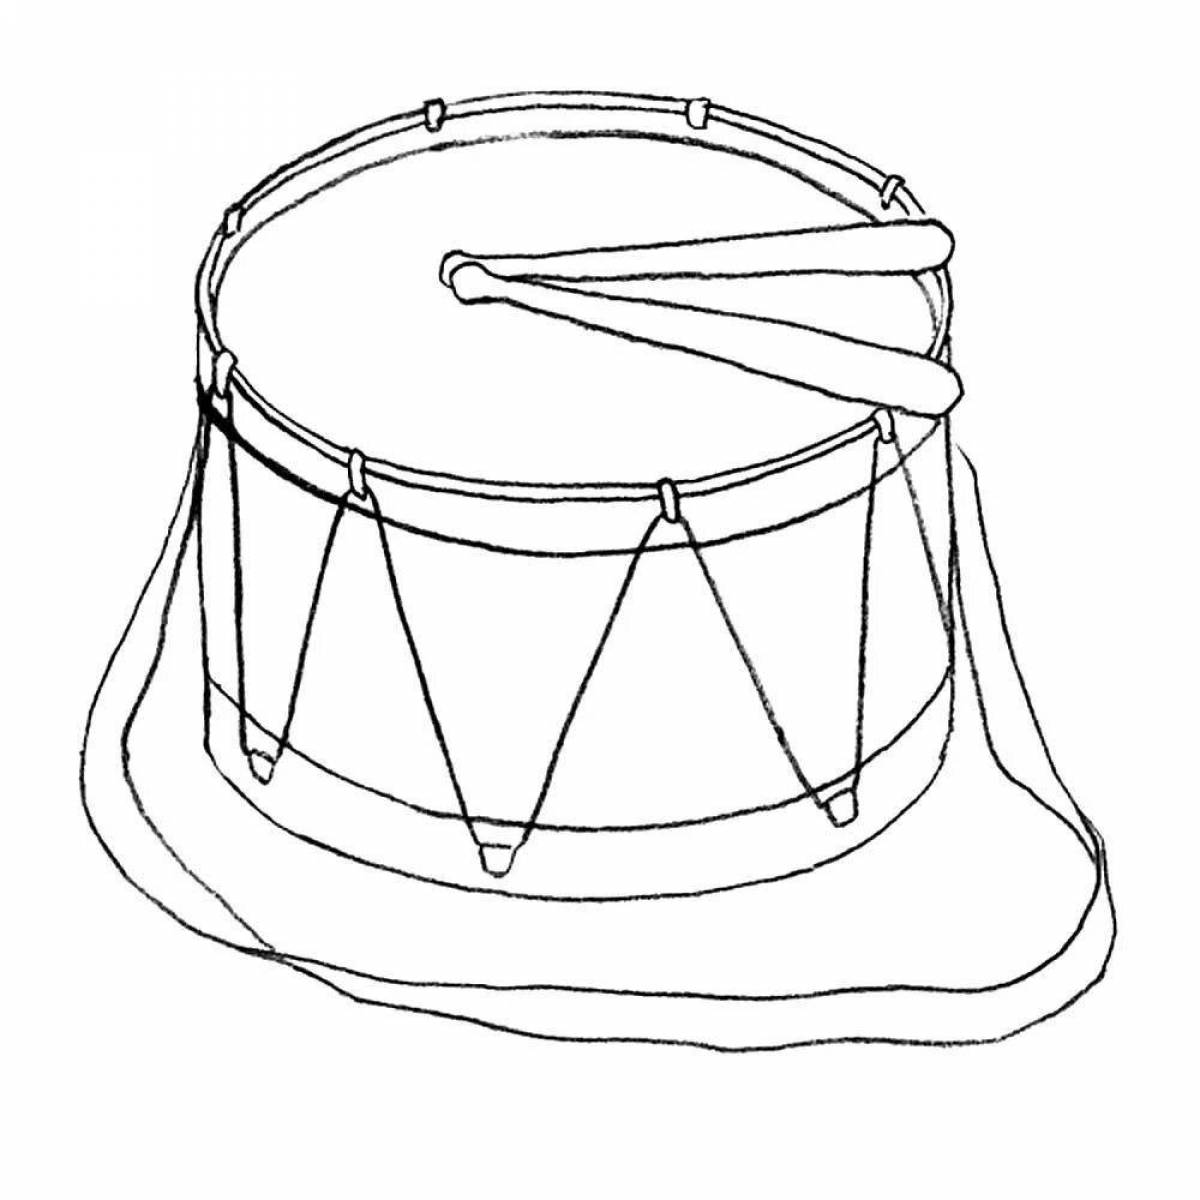 Coloring page joyful drum for children